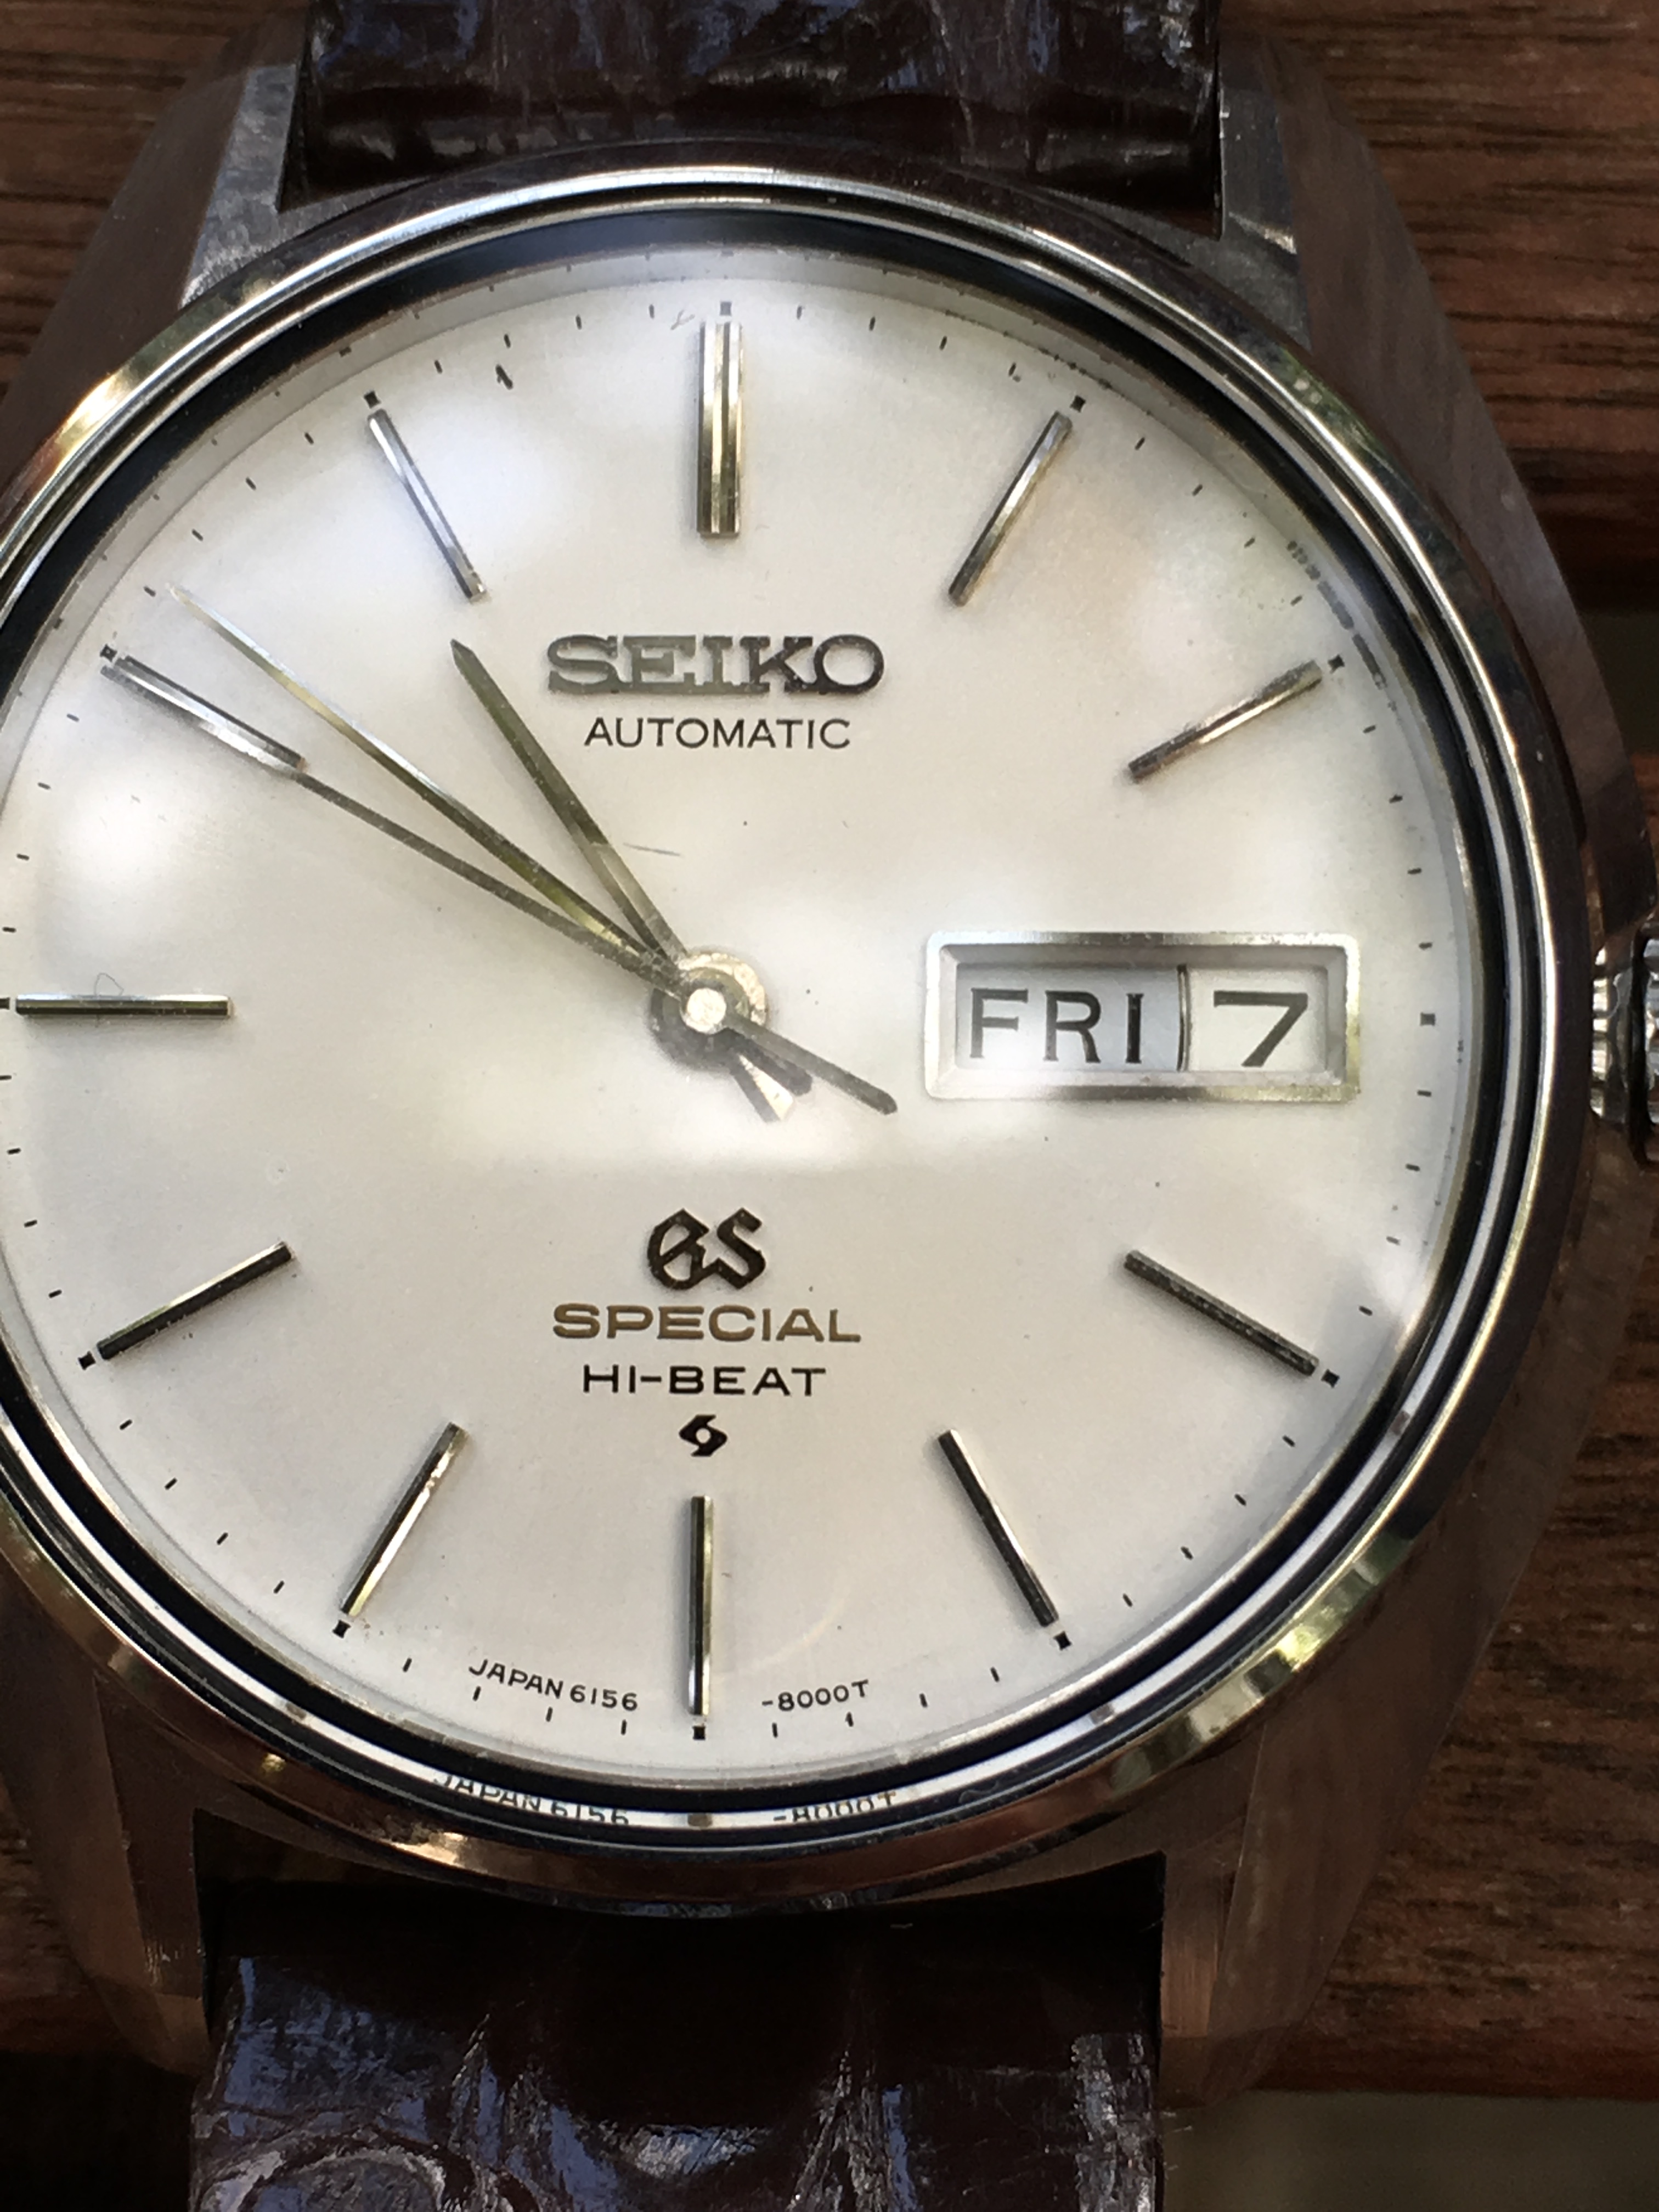 SOLD - REDUCED 1970 Grand Seiko 6156-8000 Special Hi-Beat | Omega Forums